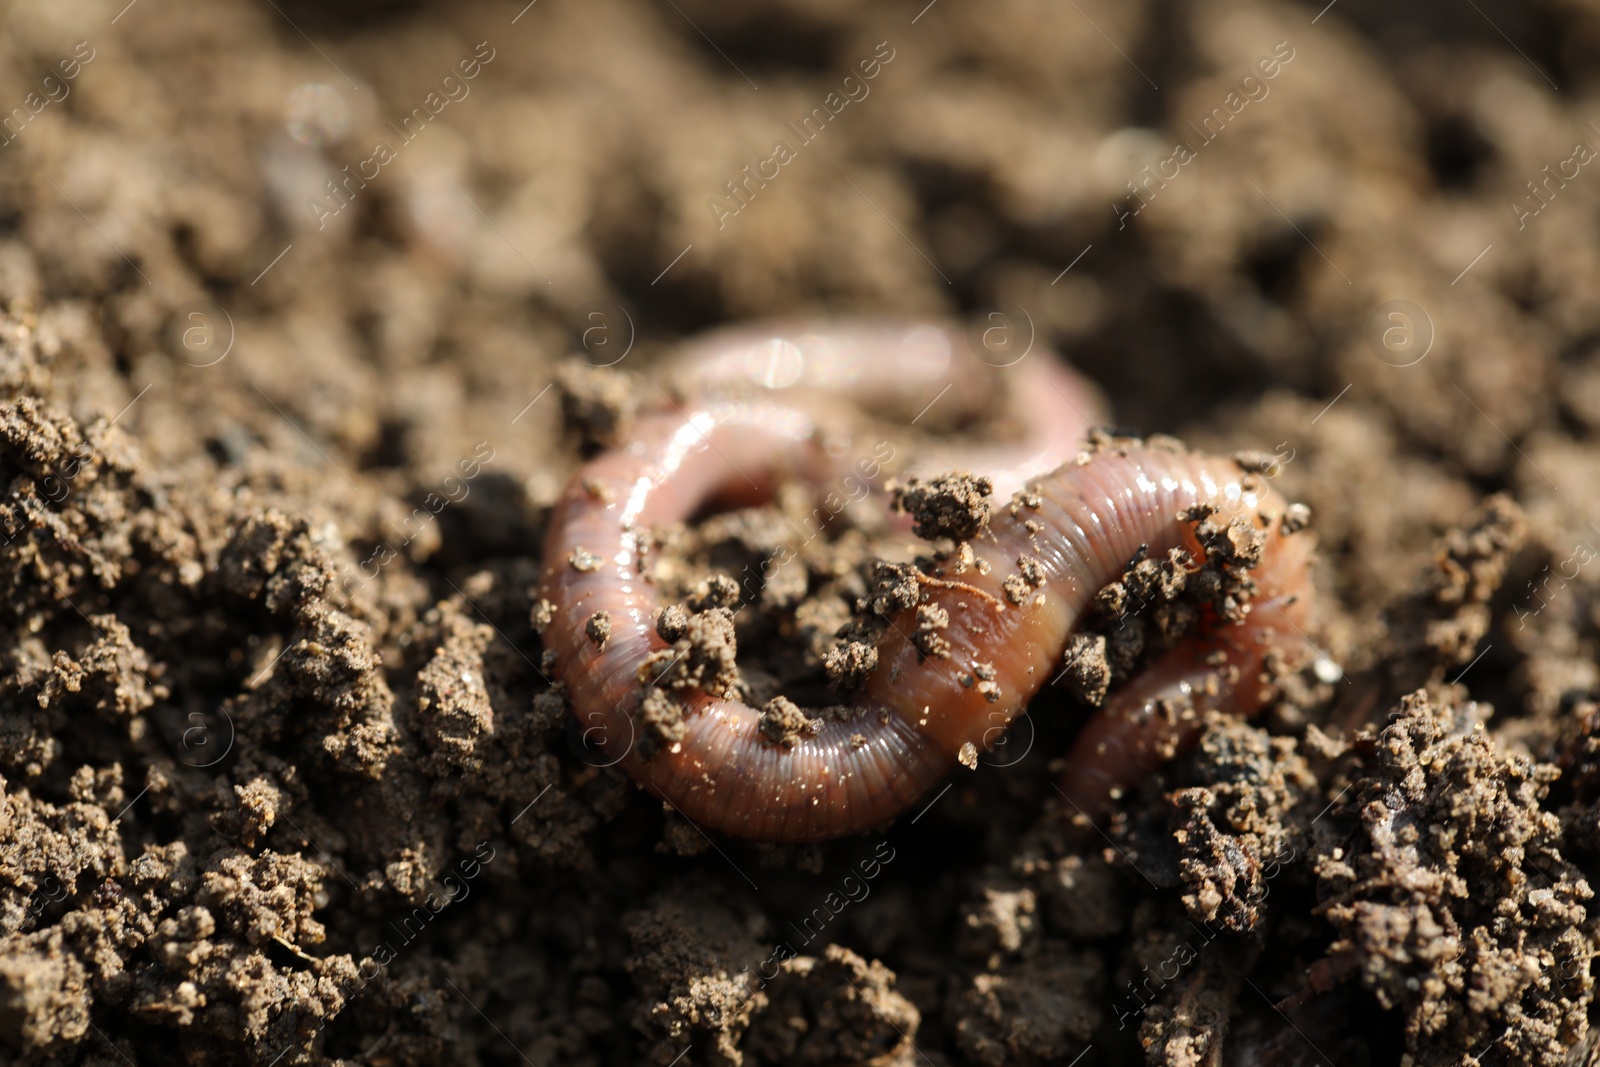 Photo of One worm on wet soil on sunny day, closeup